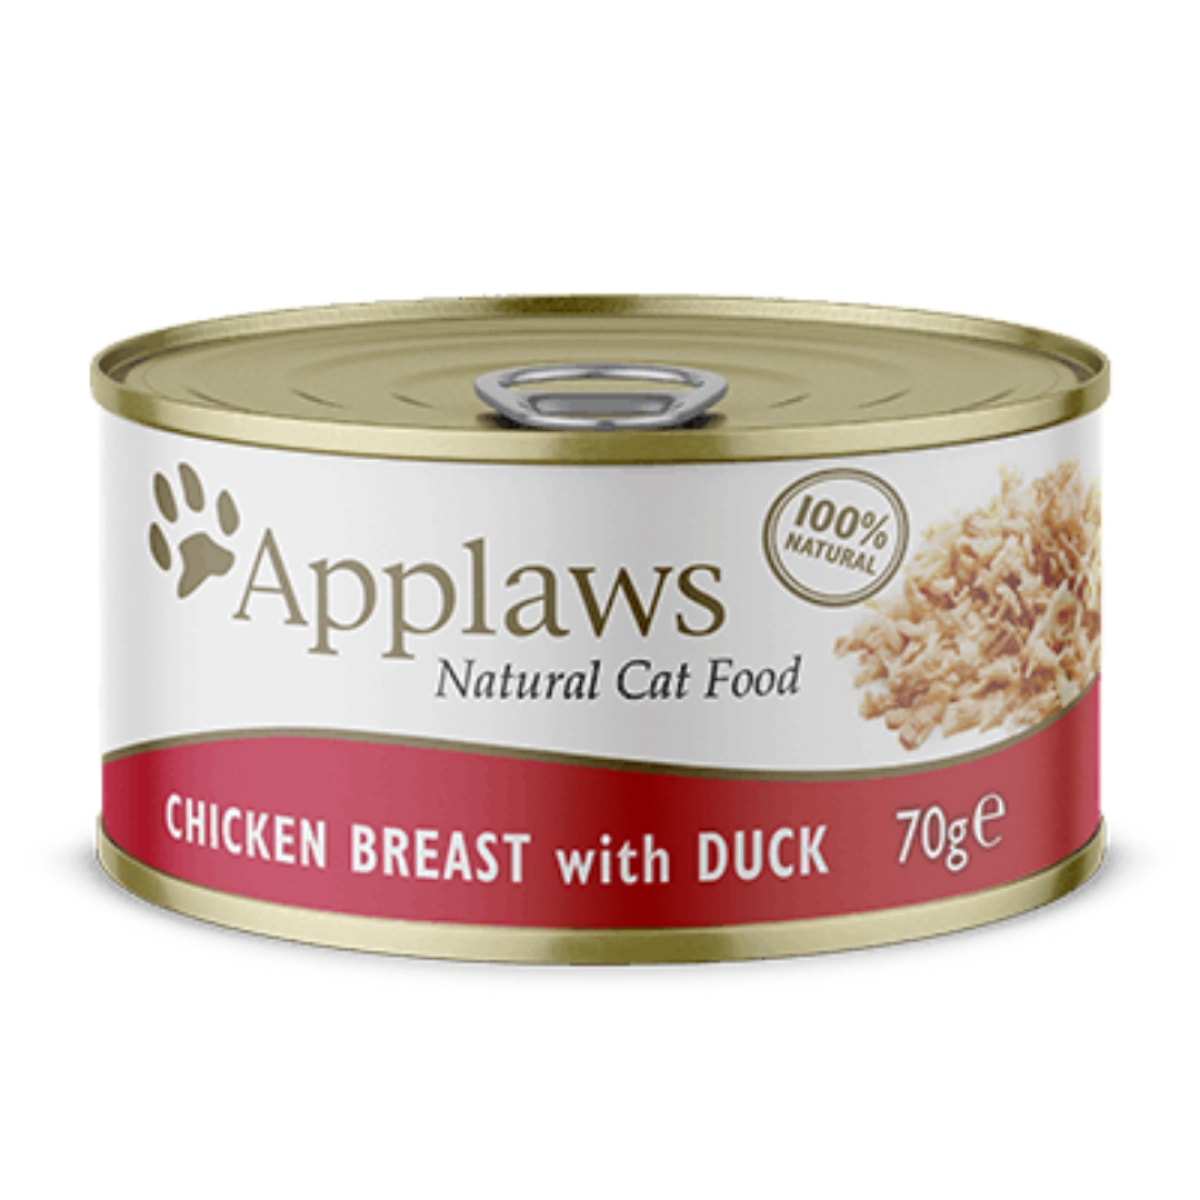 Applaws Chicken Breast with Duck 70g Main Image